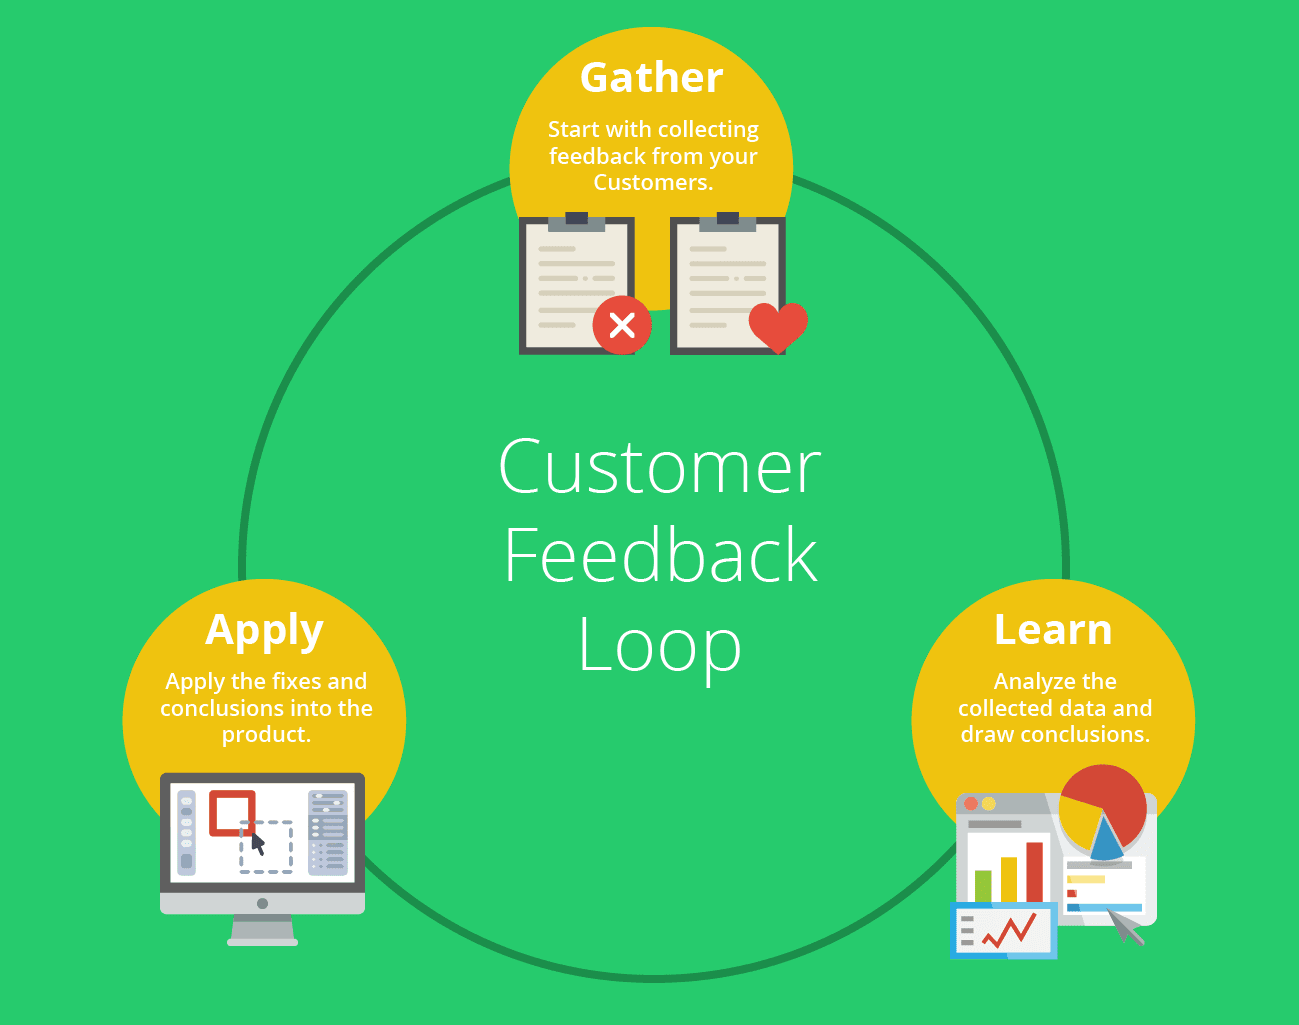 Customer feedback loop stages: gather, learn, and apply.